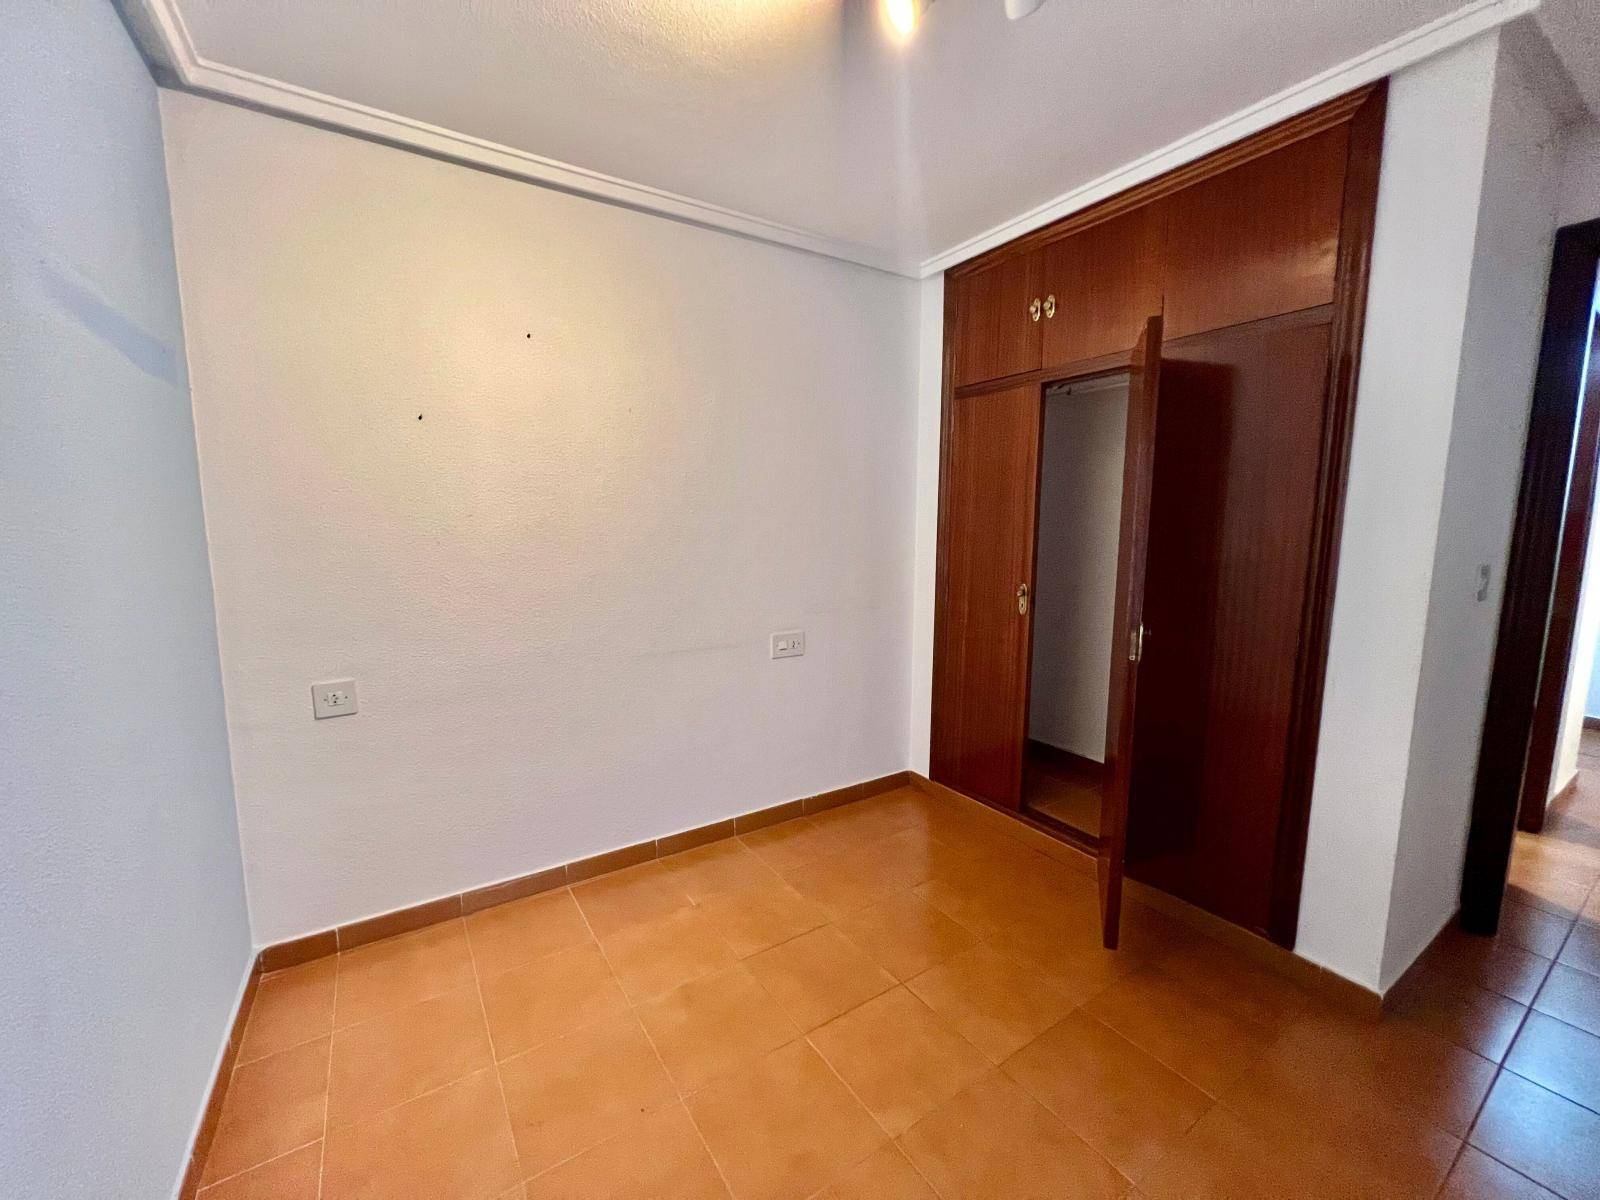 SPACIOUS APARTMENT IN THE HEART OF THE CITY CENTRE, 300 METRES FROM THE YACHT CLUB